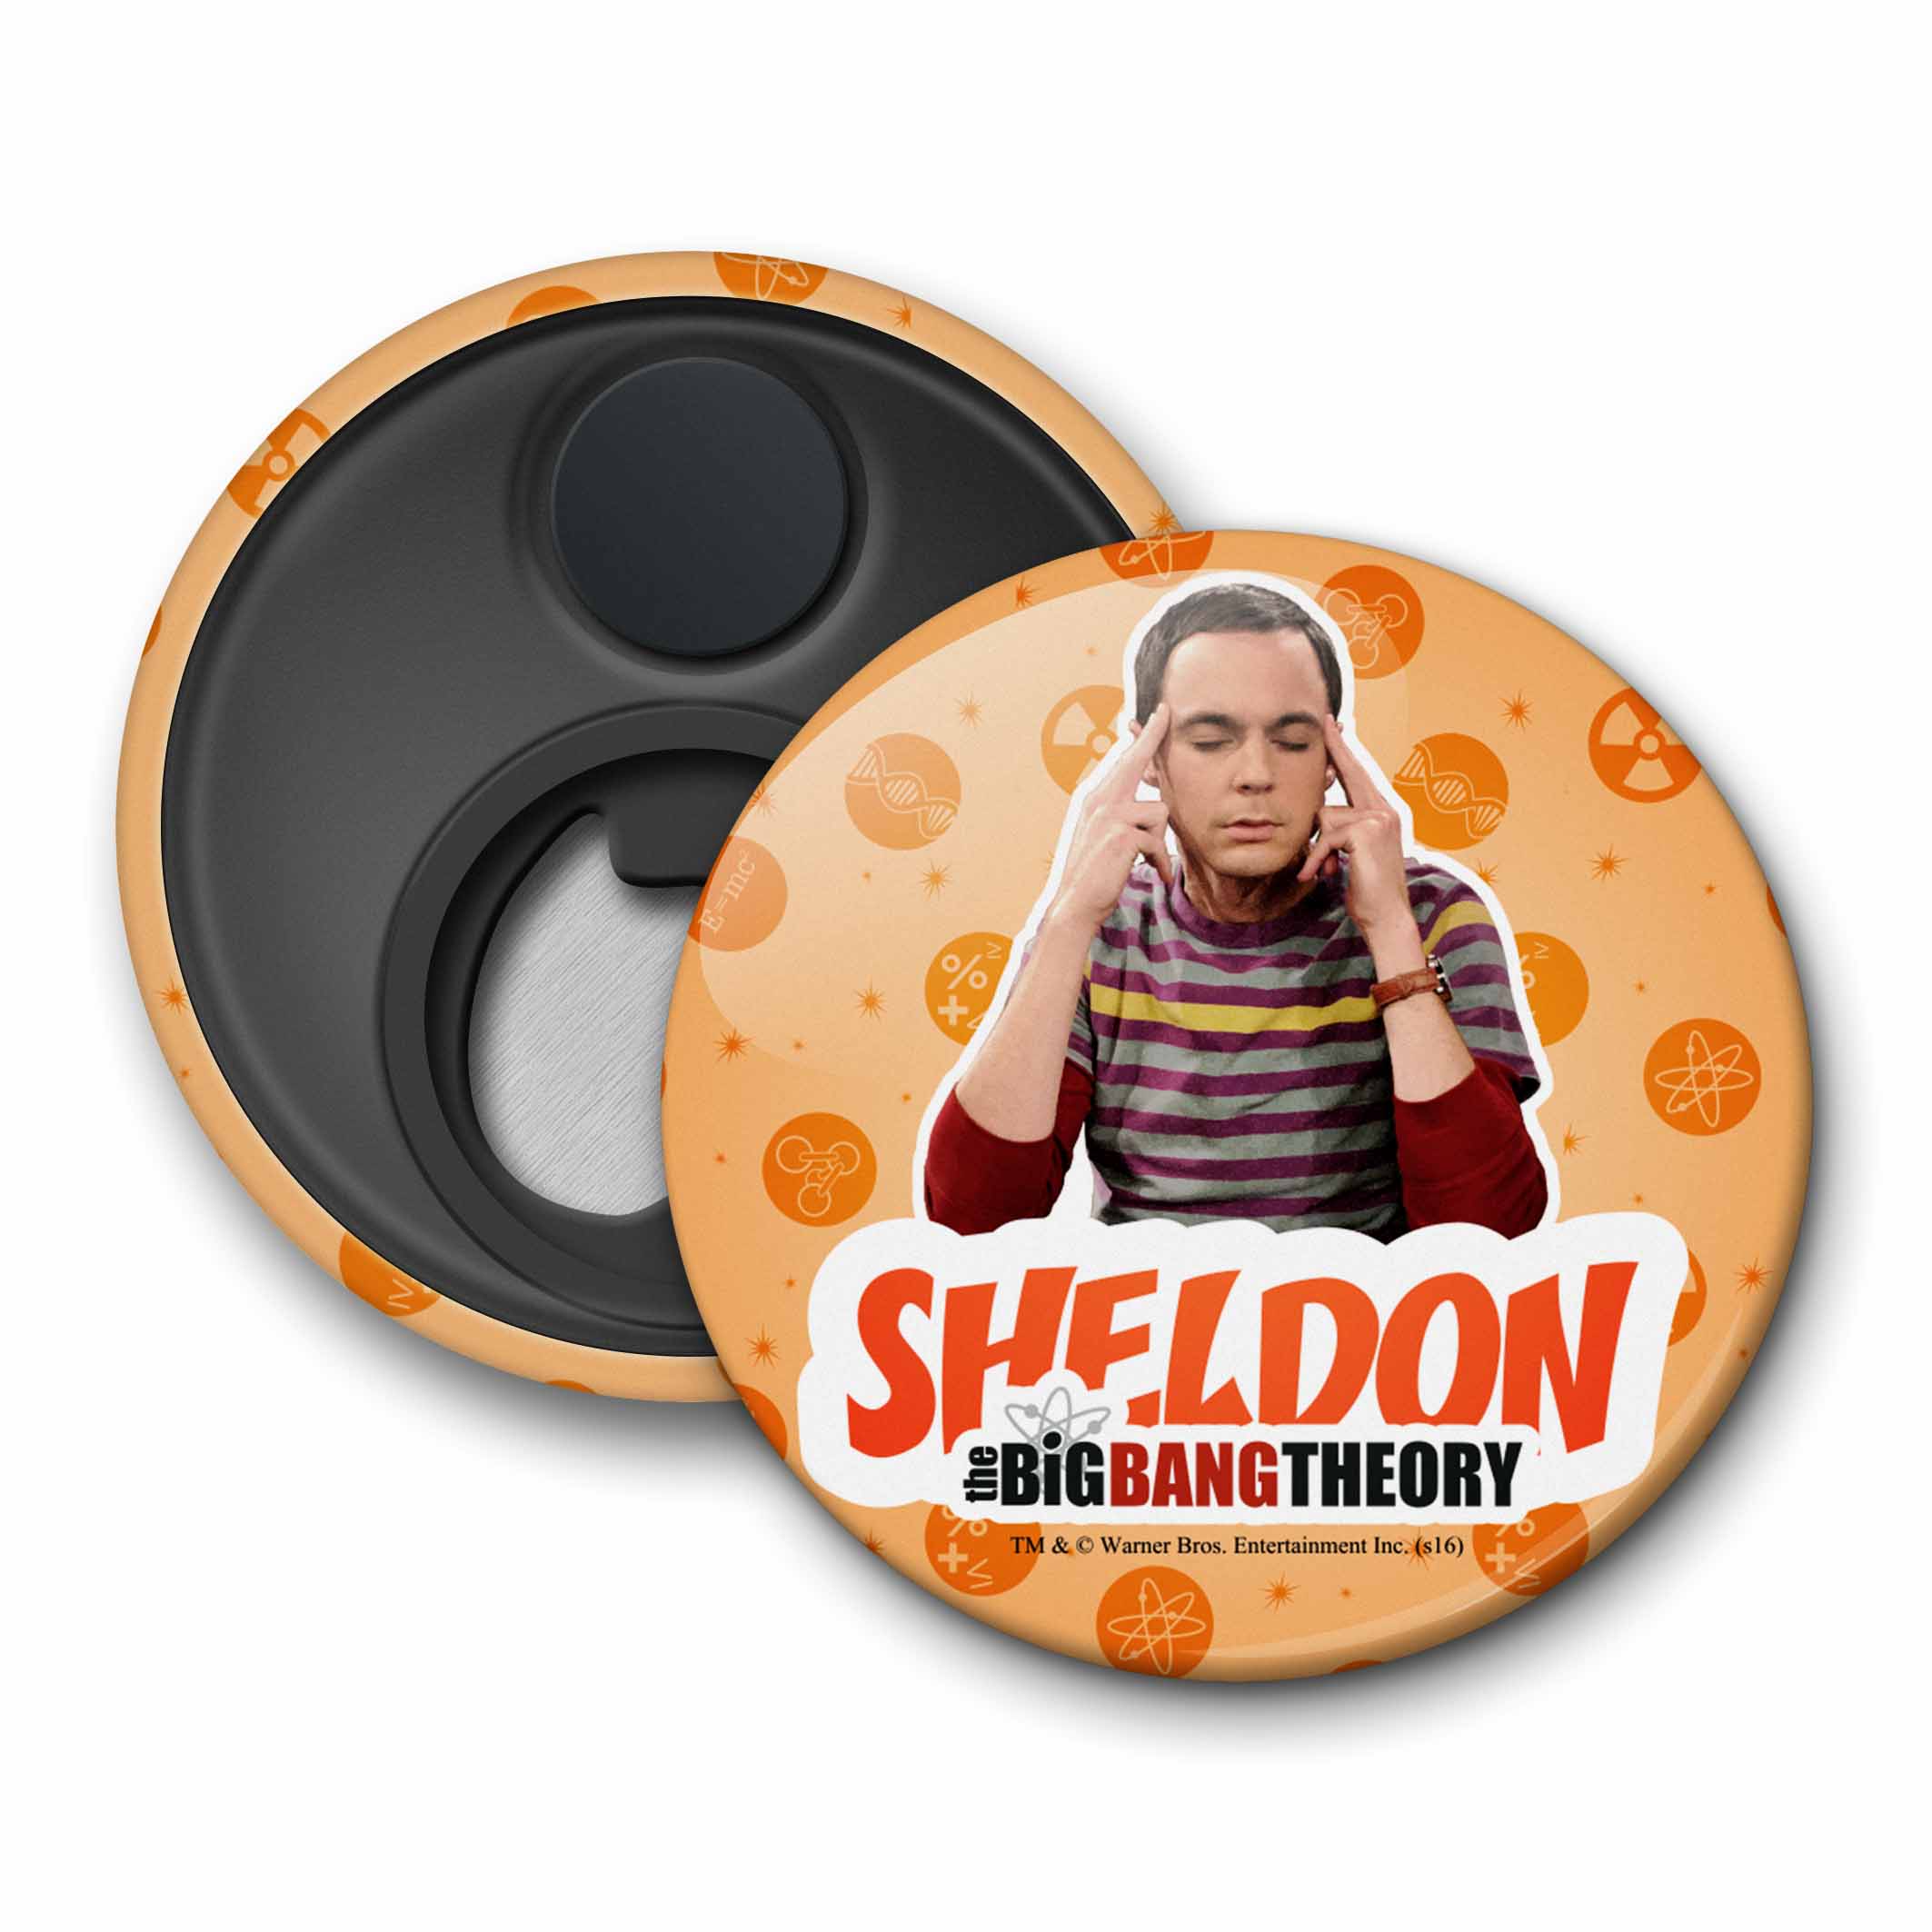 Buy The Big Bang Theory Sheldon Fridge Magnet Licensed By Warner Bros Online ₹199 From Shopclues